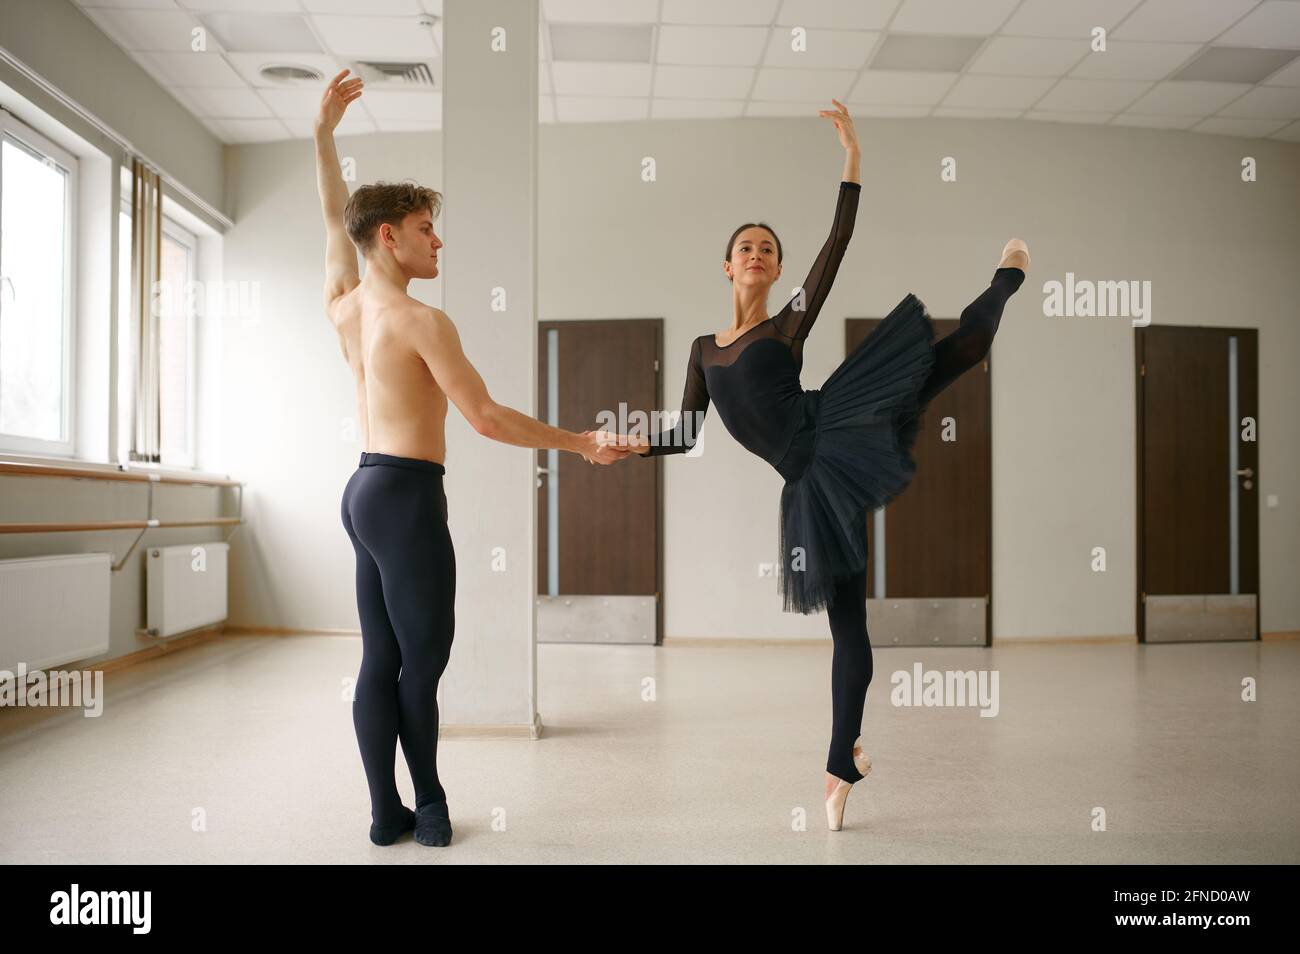 Female and male ballet dancers dancing at barre Stock Photo